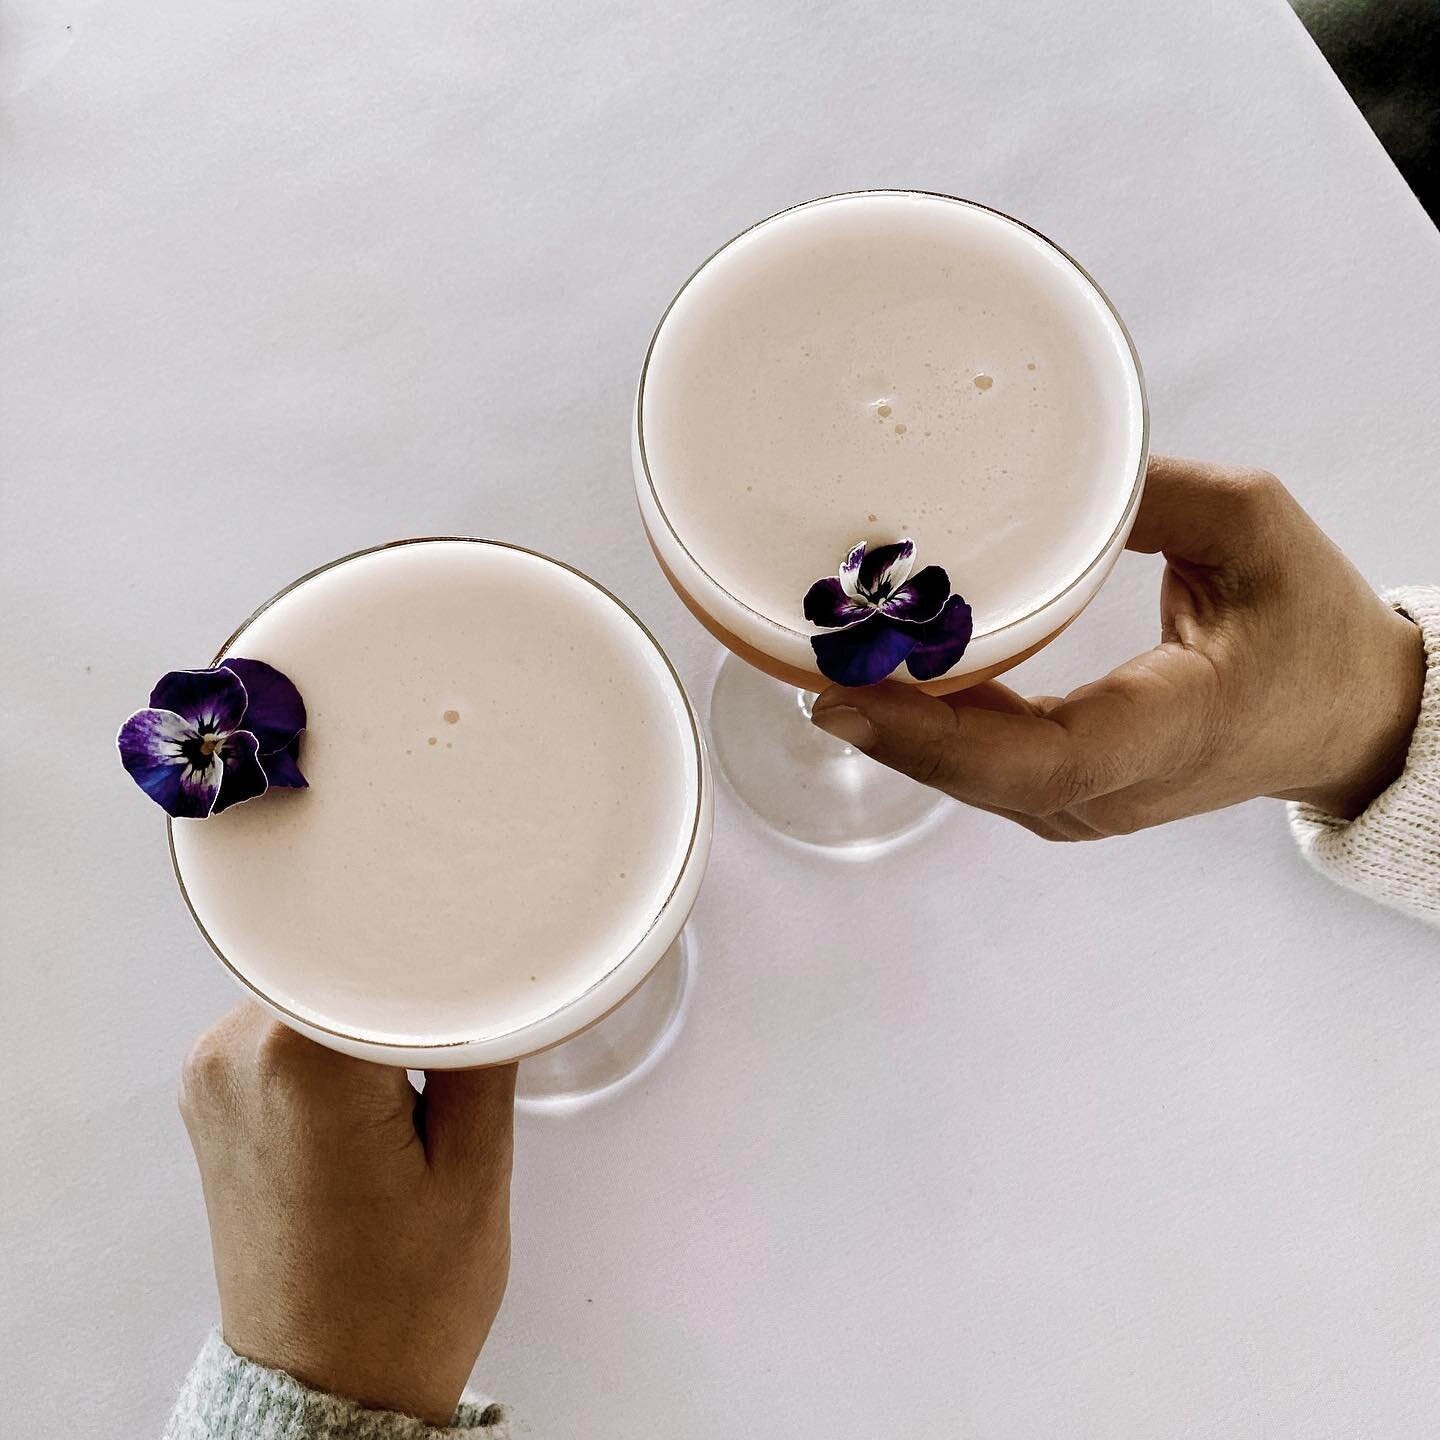 Cheers to the most perfect weekend with our brides #worklifebalance #springisnear